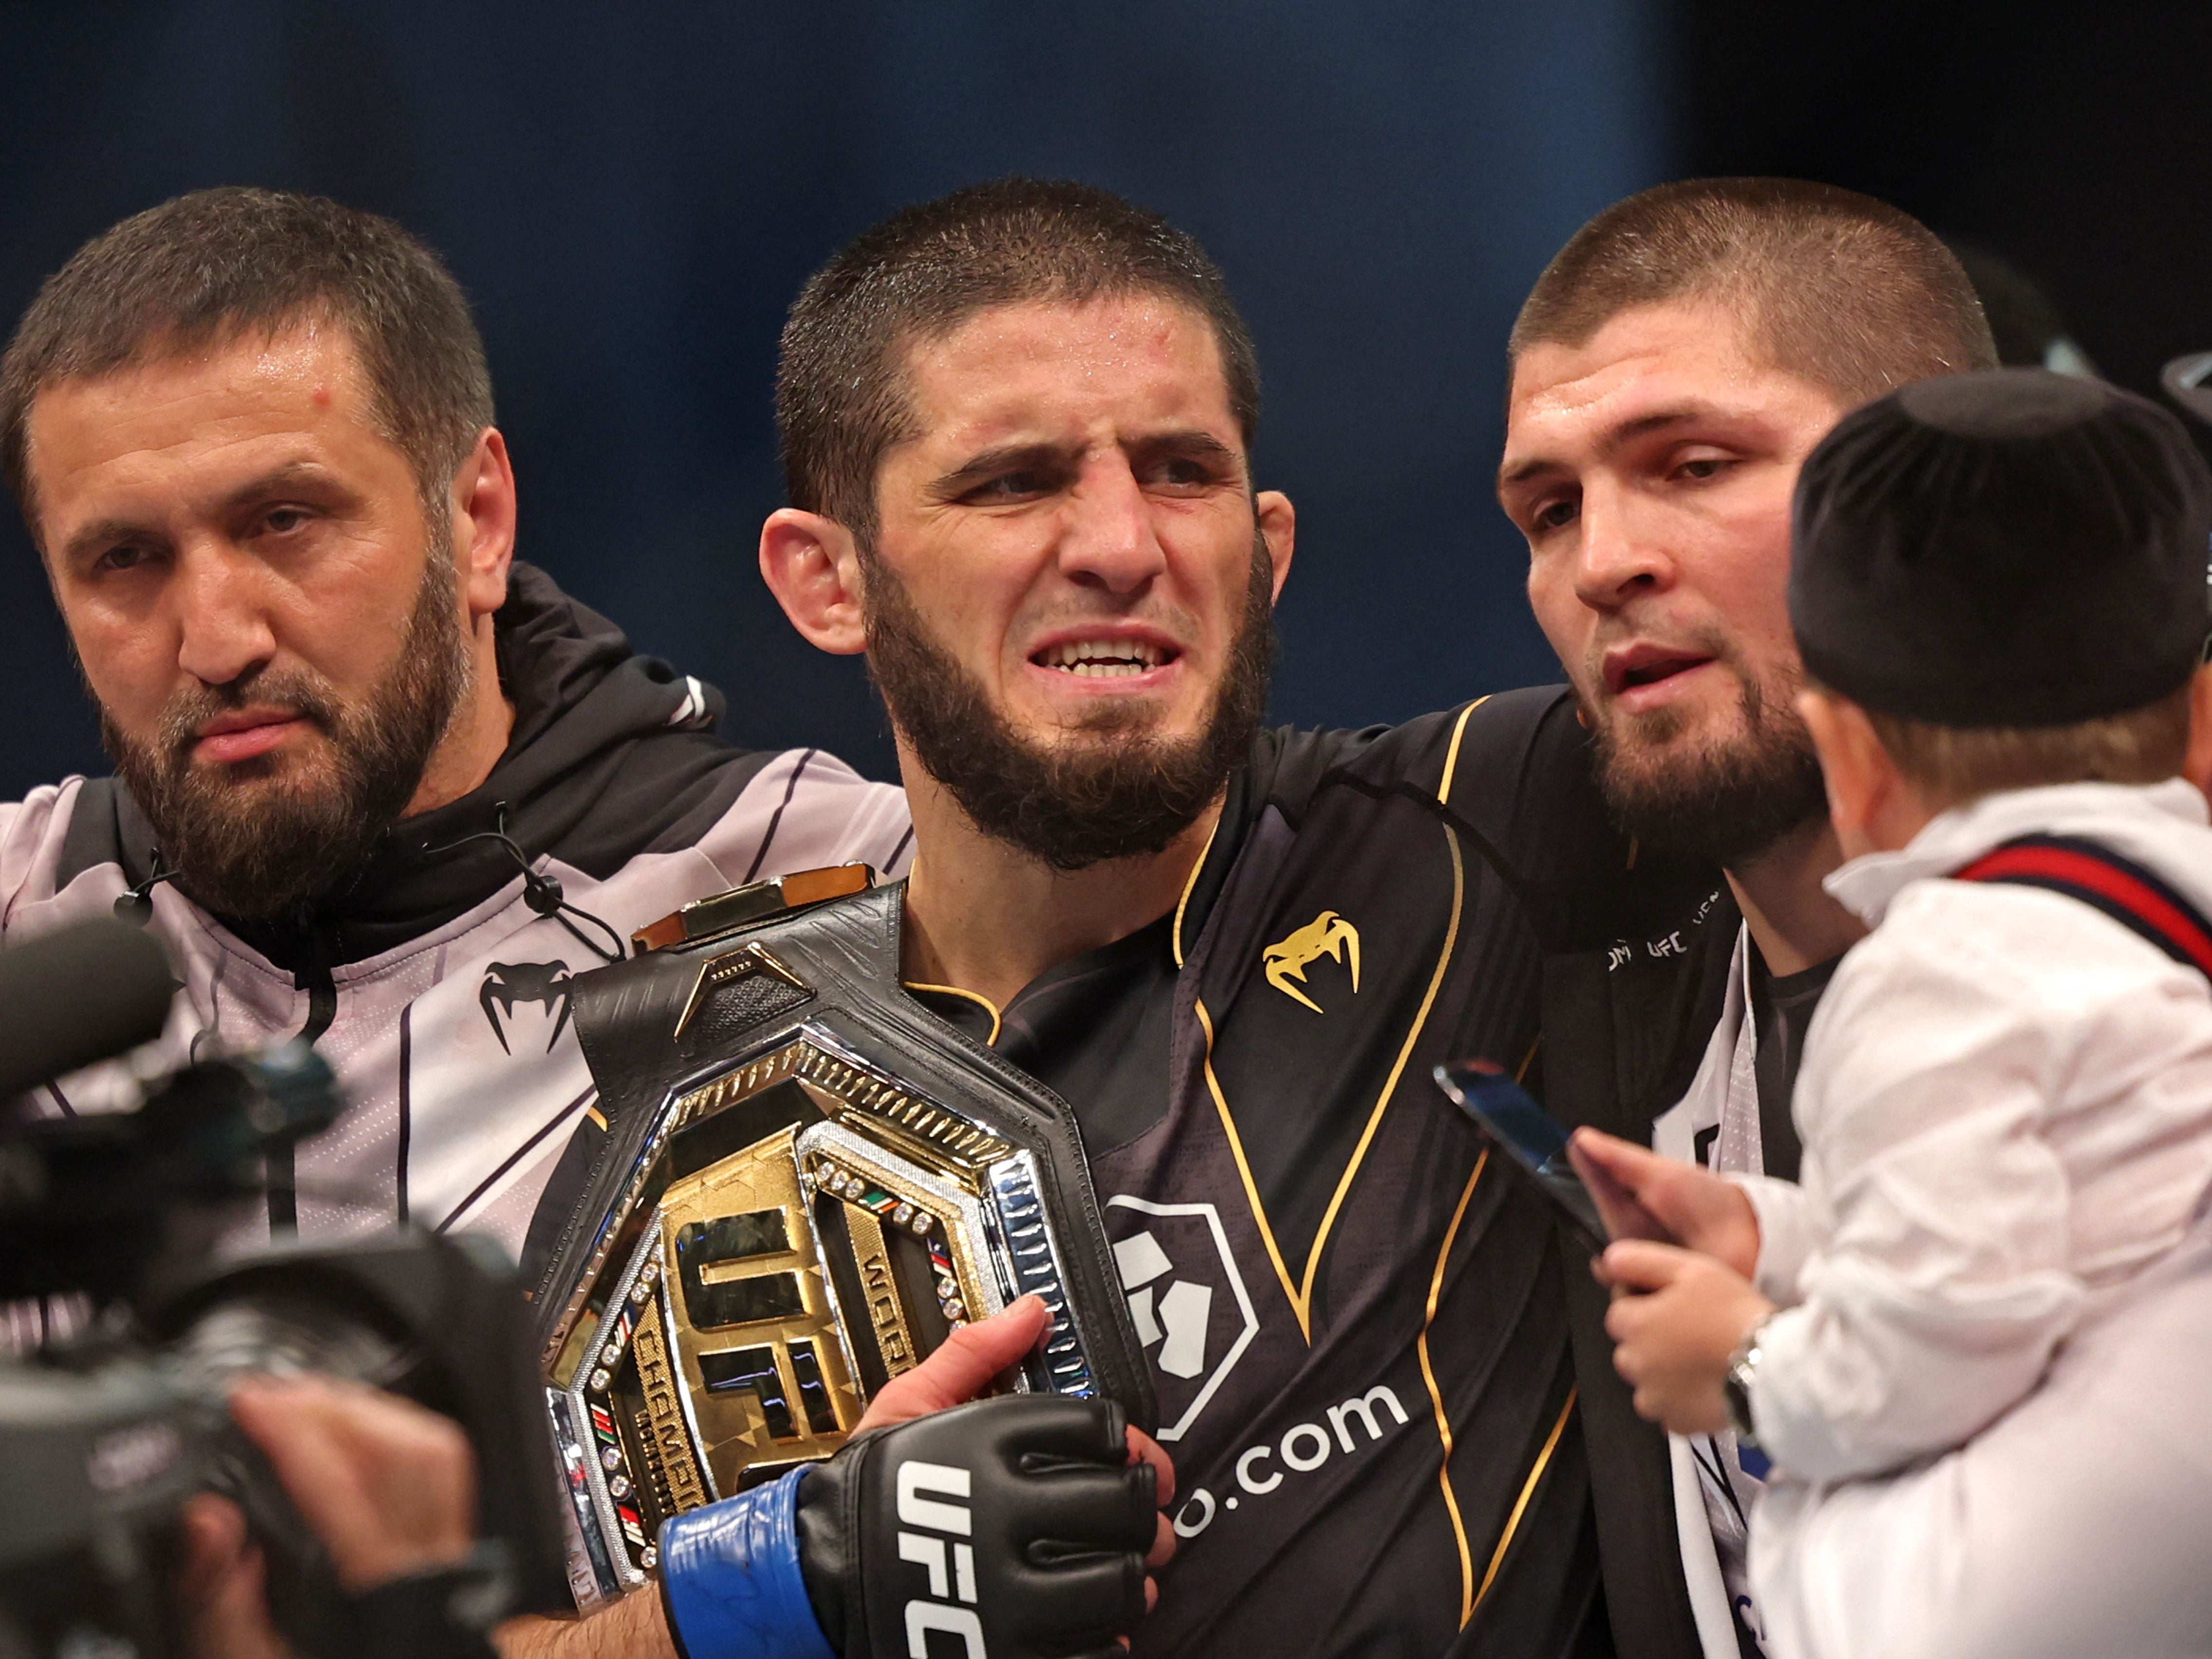 Islam Makhachev (centre) with Khabib Nurmagomedov (centre-right) after submitting Charles Oliveira to win the UFC lightweight title